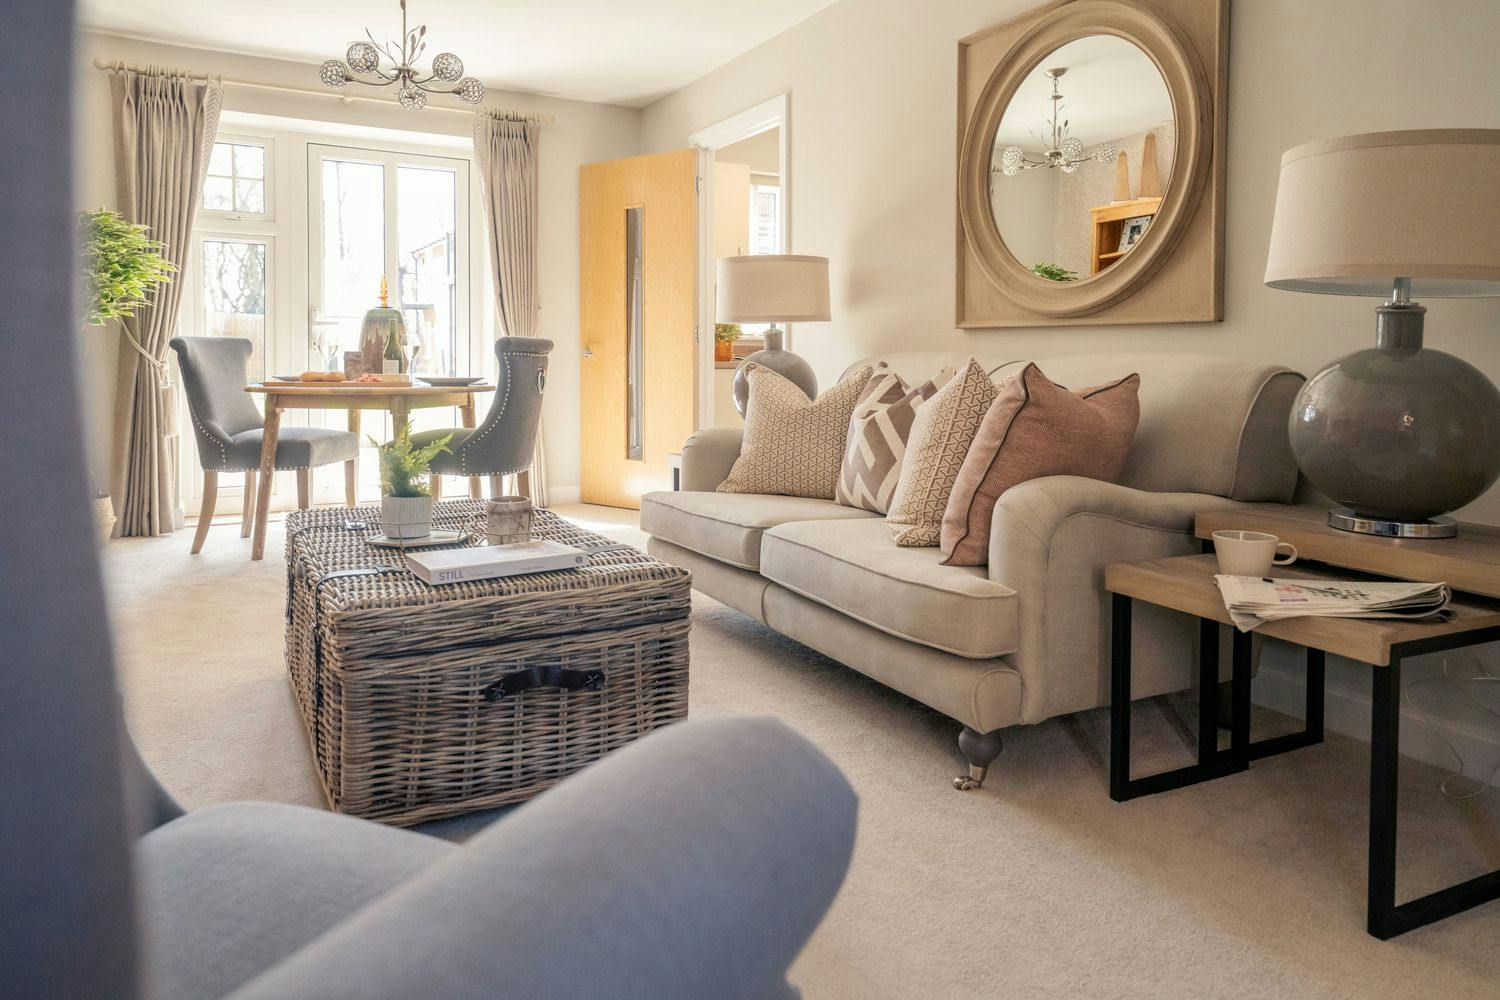 Living Room at Swift House Retirement Development in Berkshire, South East England